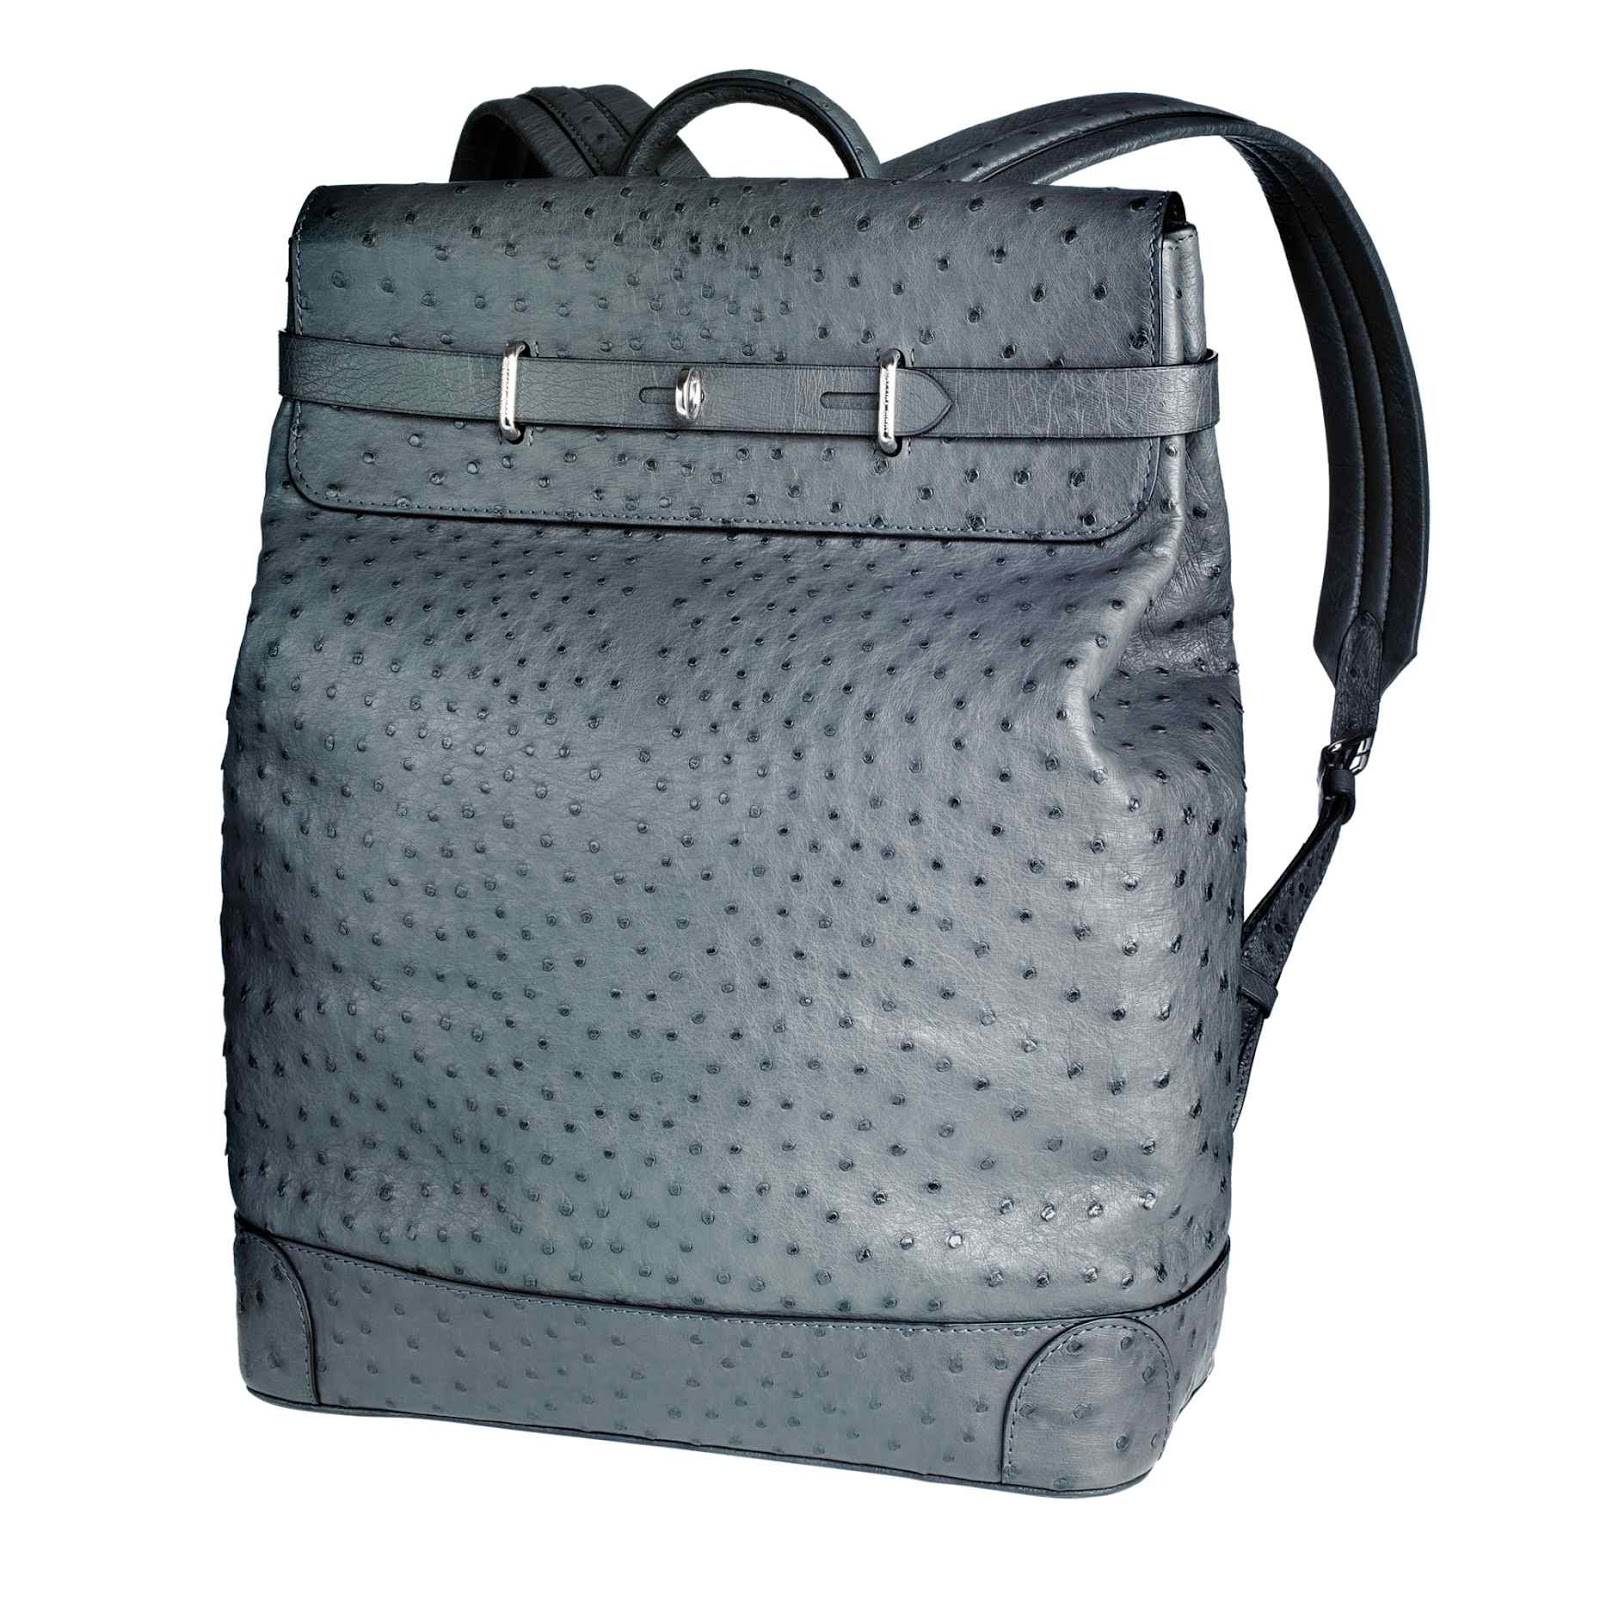 Disappear Here: Louis Vuitton Ostrich Steamer Backpack.